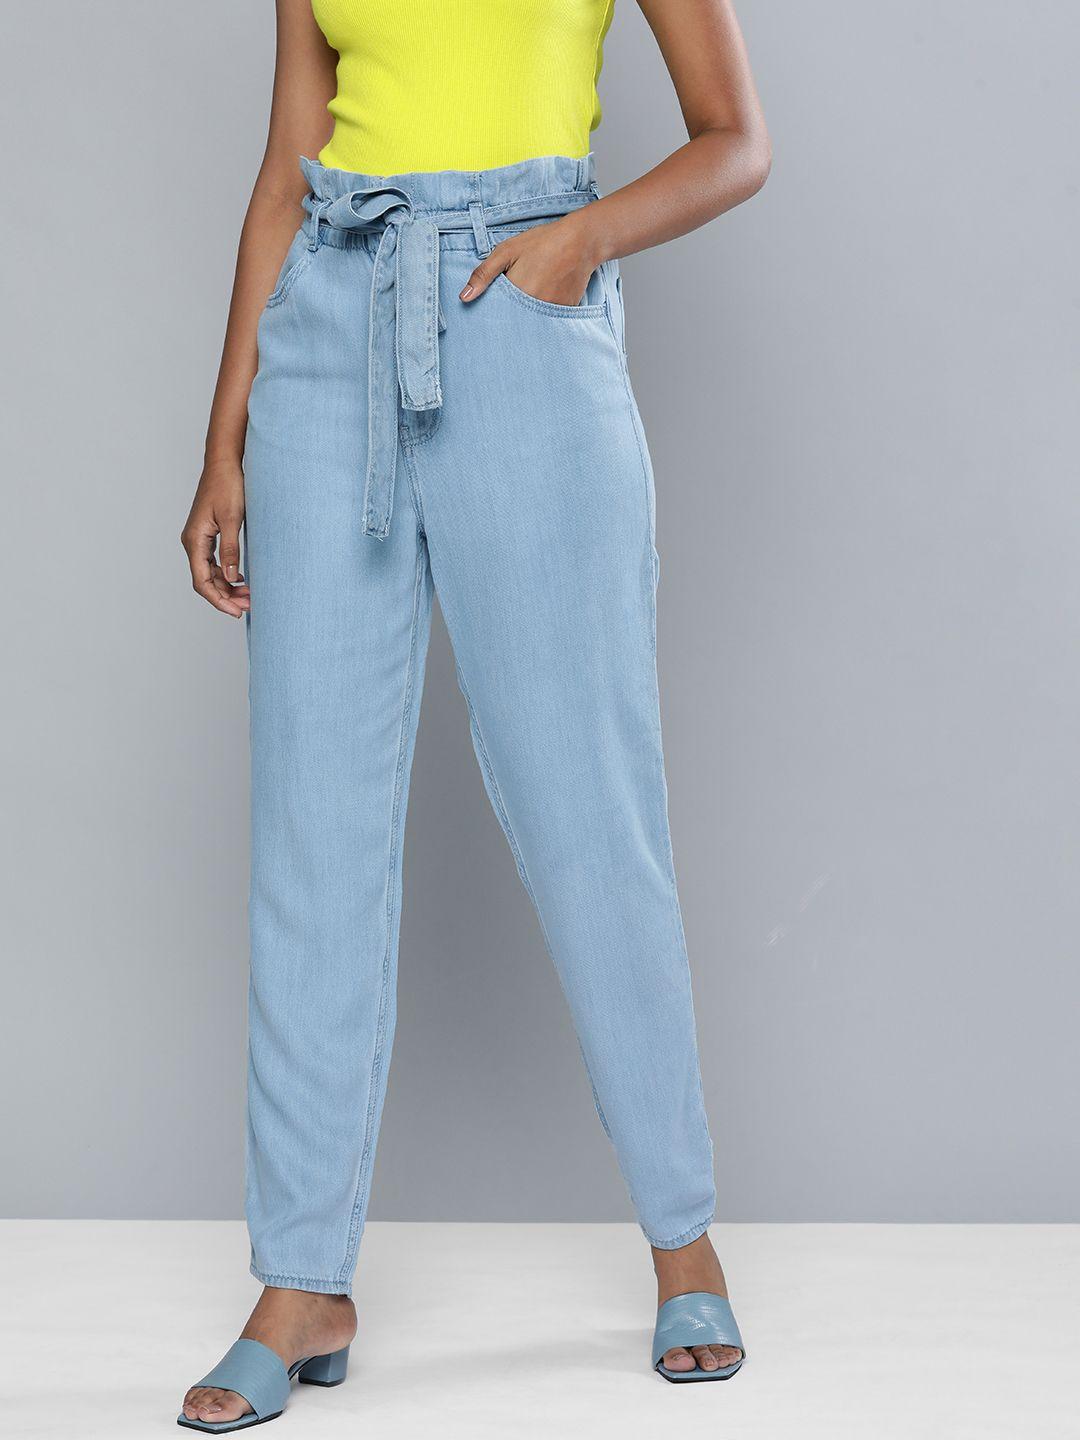 levis x deepika padukone women light blue tapered fit mid-rise jeans with a belt